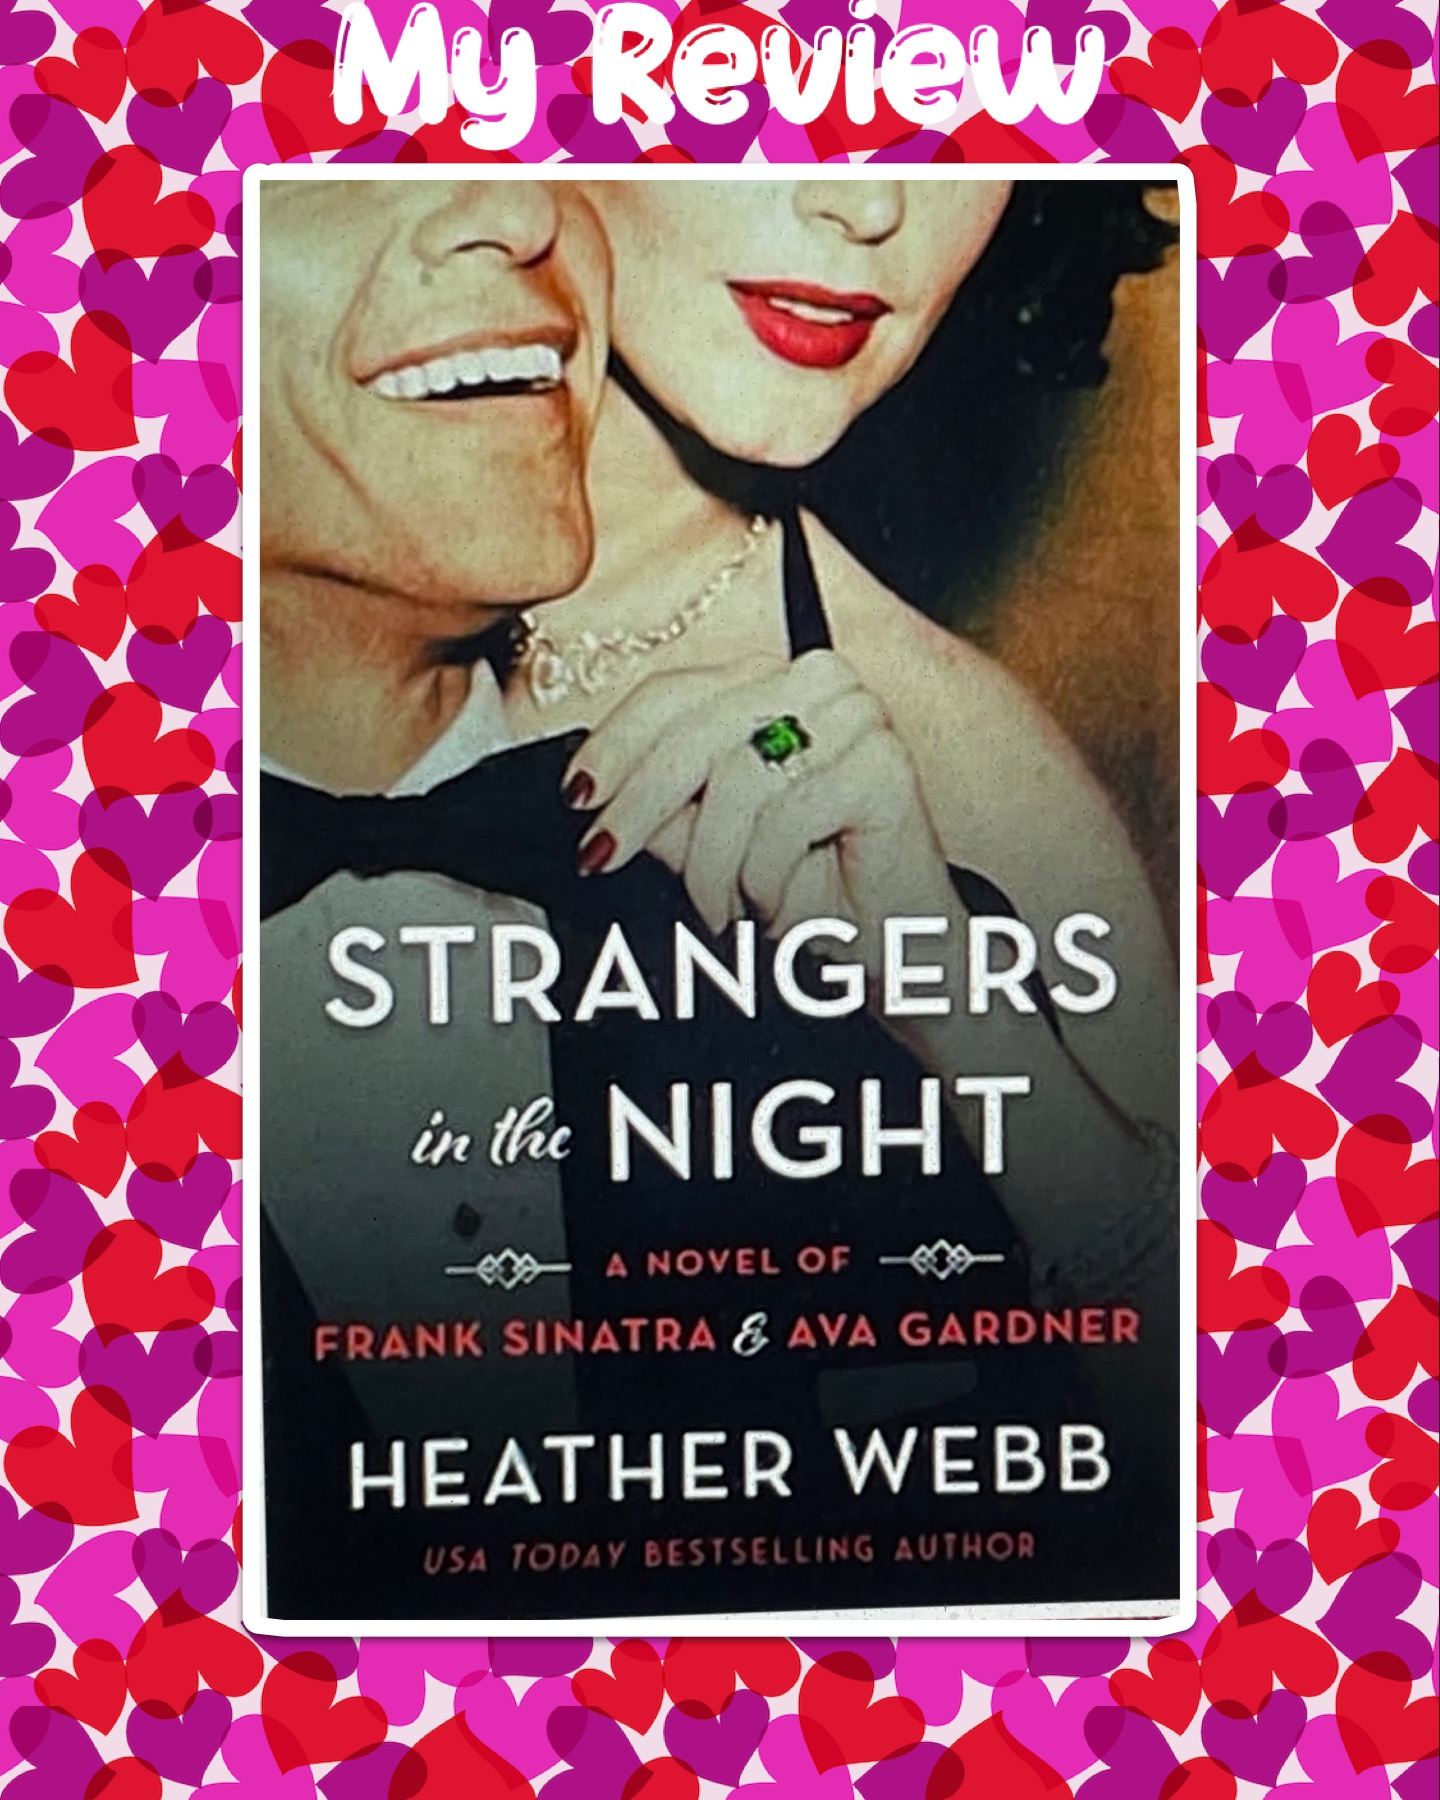 Linda's Book Obsession Reviews “Strangers in the Night; A Novel of